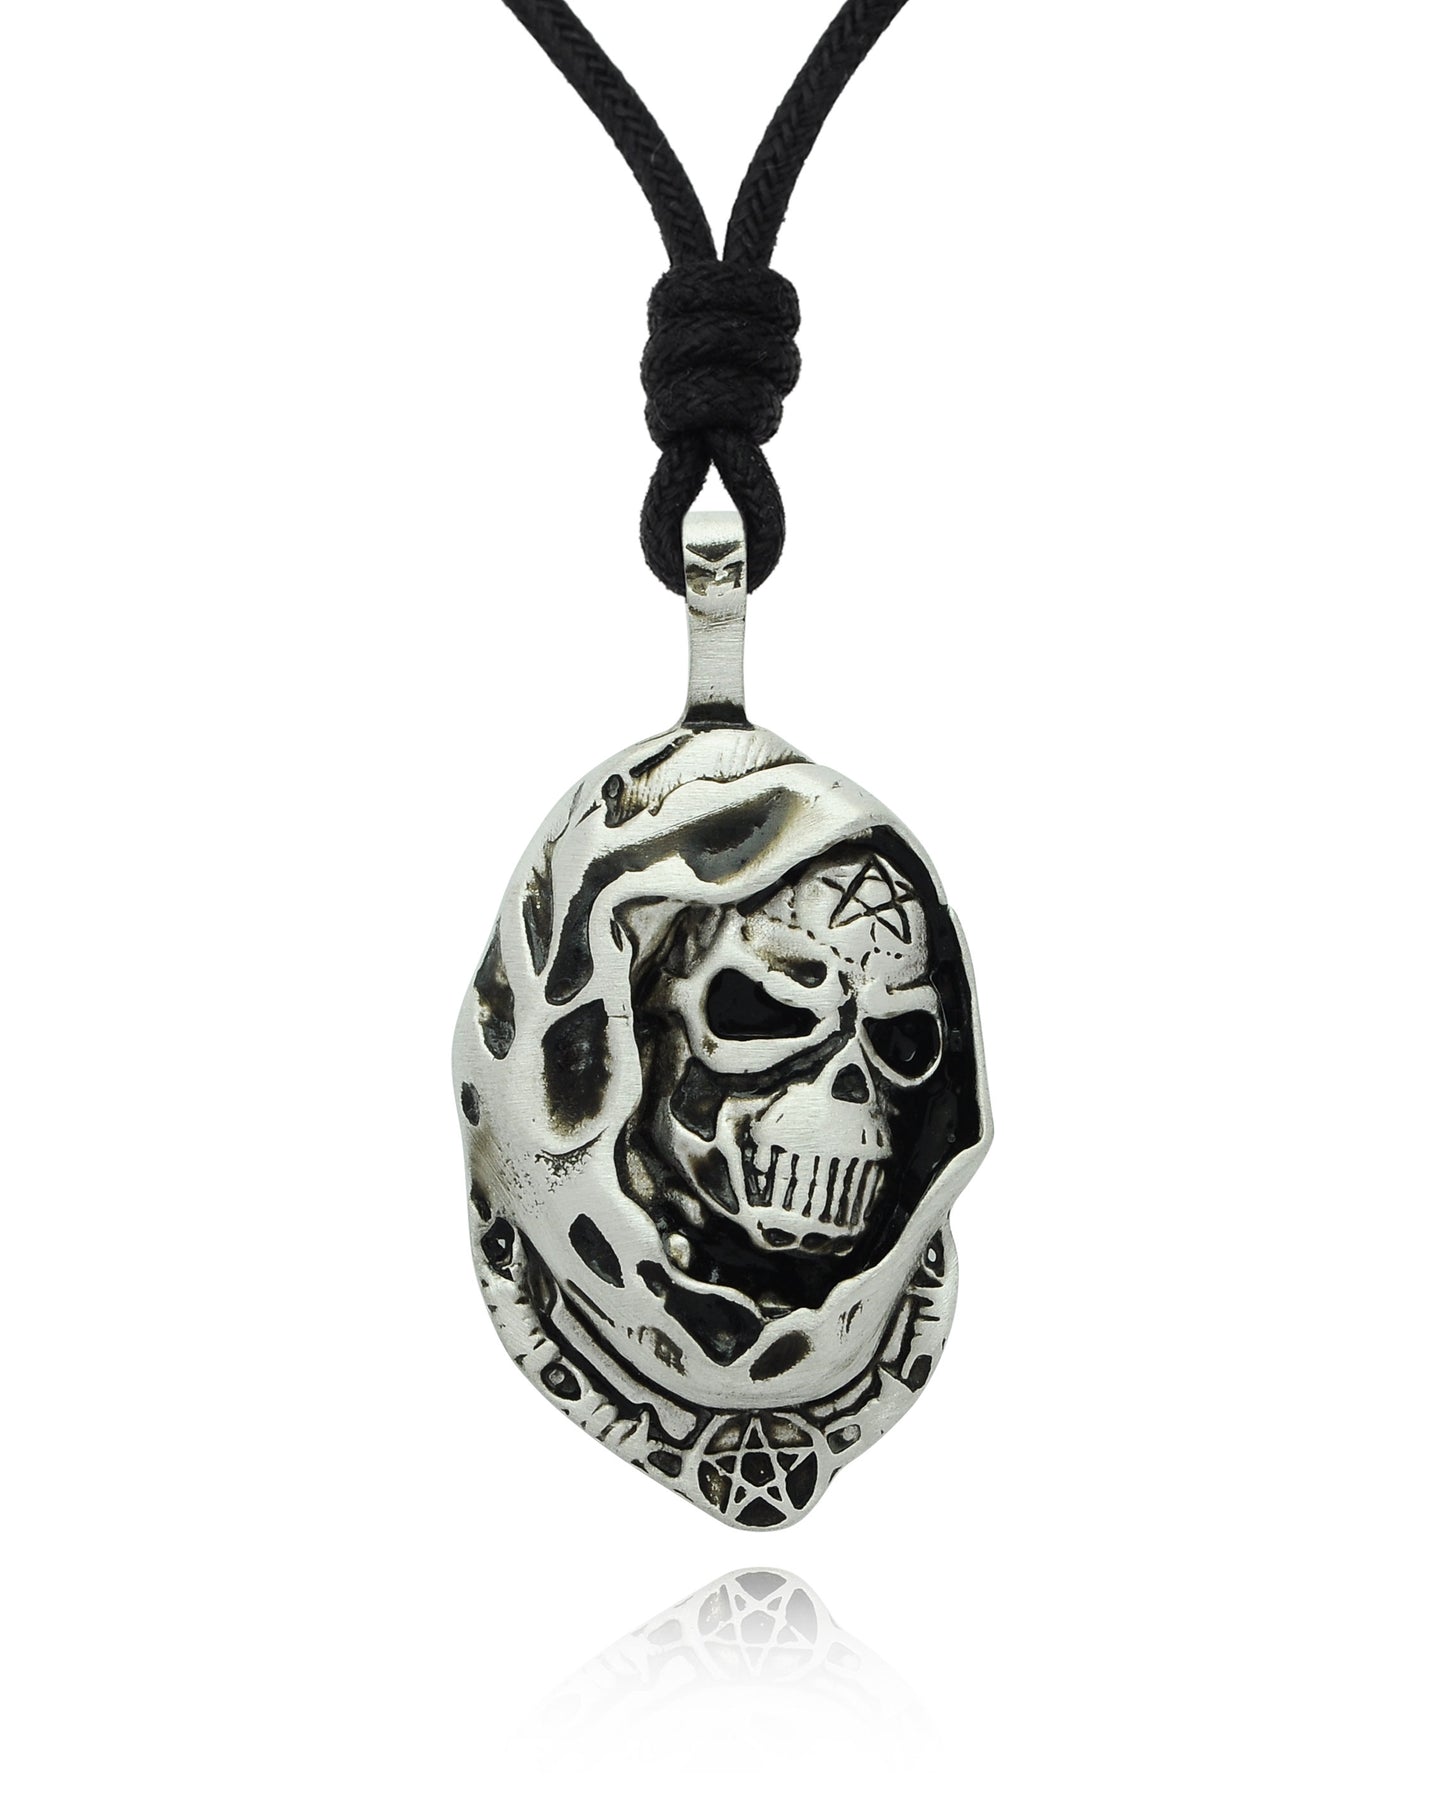 Grim Reaper Silver Pewter Charm Necklace Pendant Jewelry